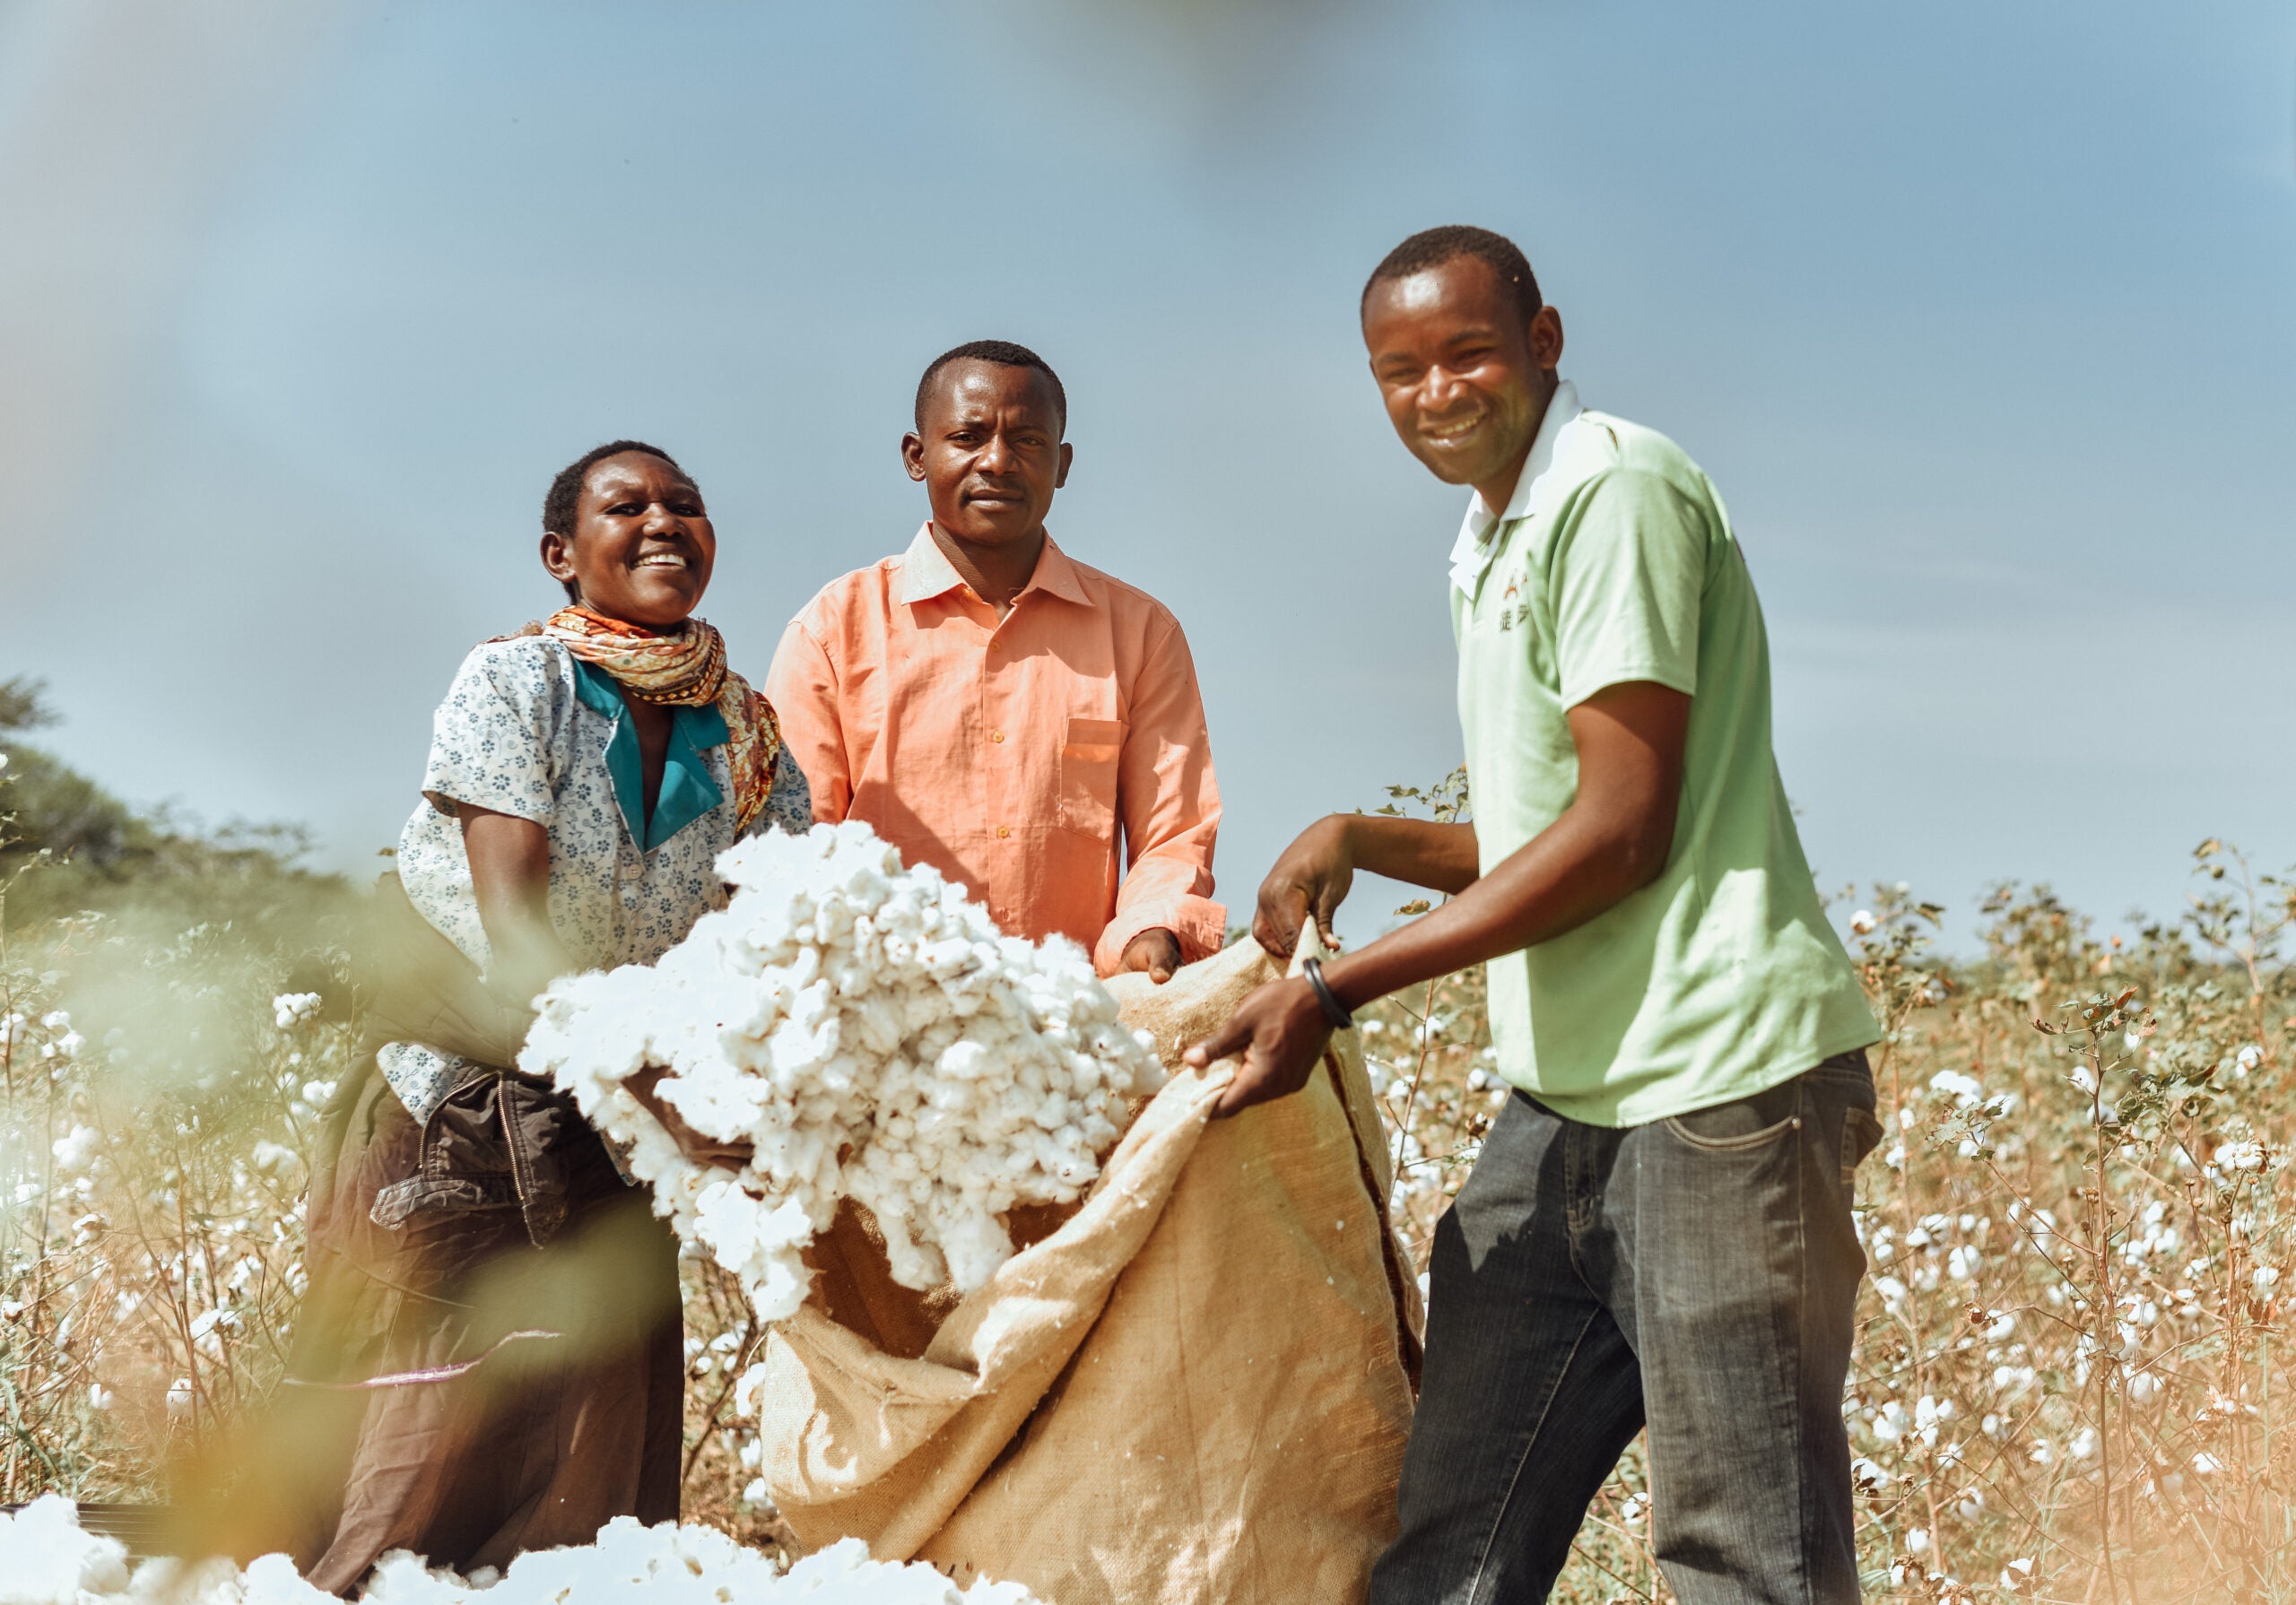 Cotton Made in Africa training proven to increase cotton yields